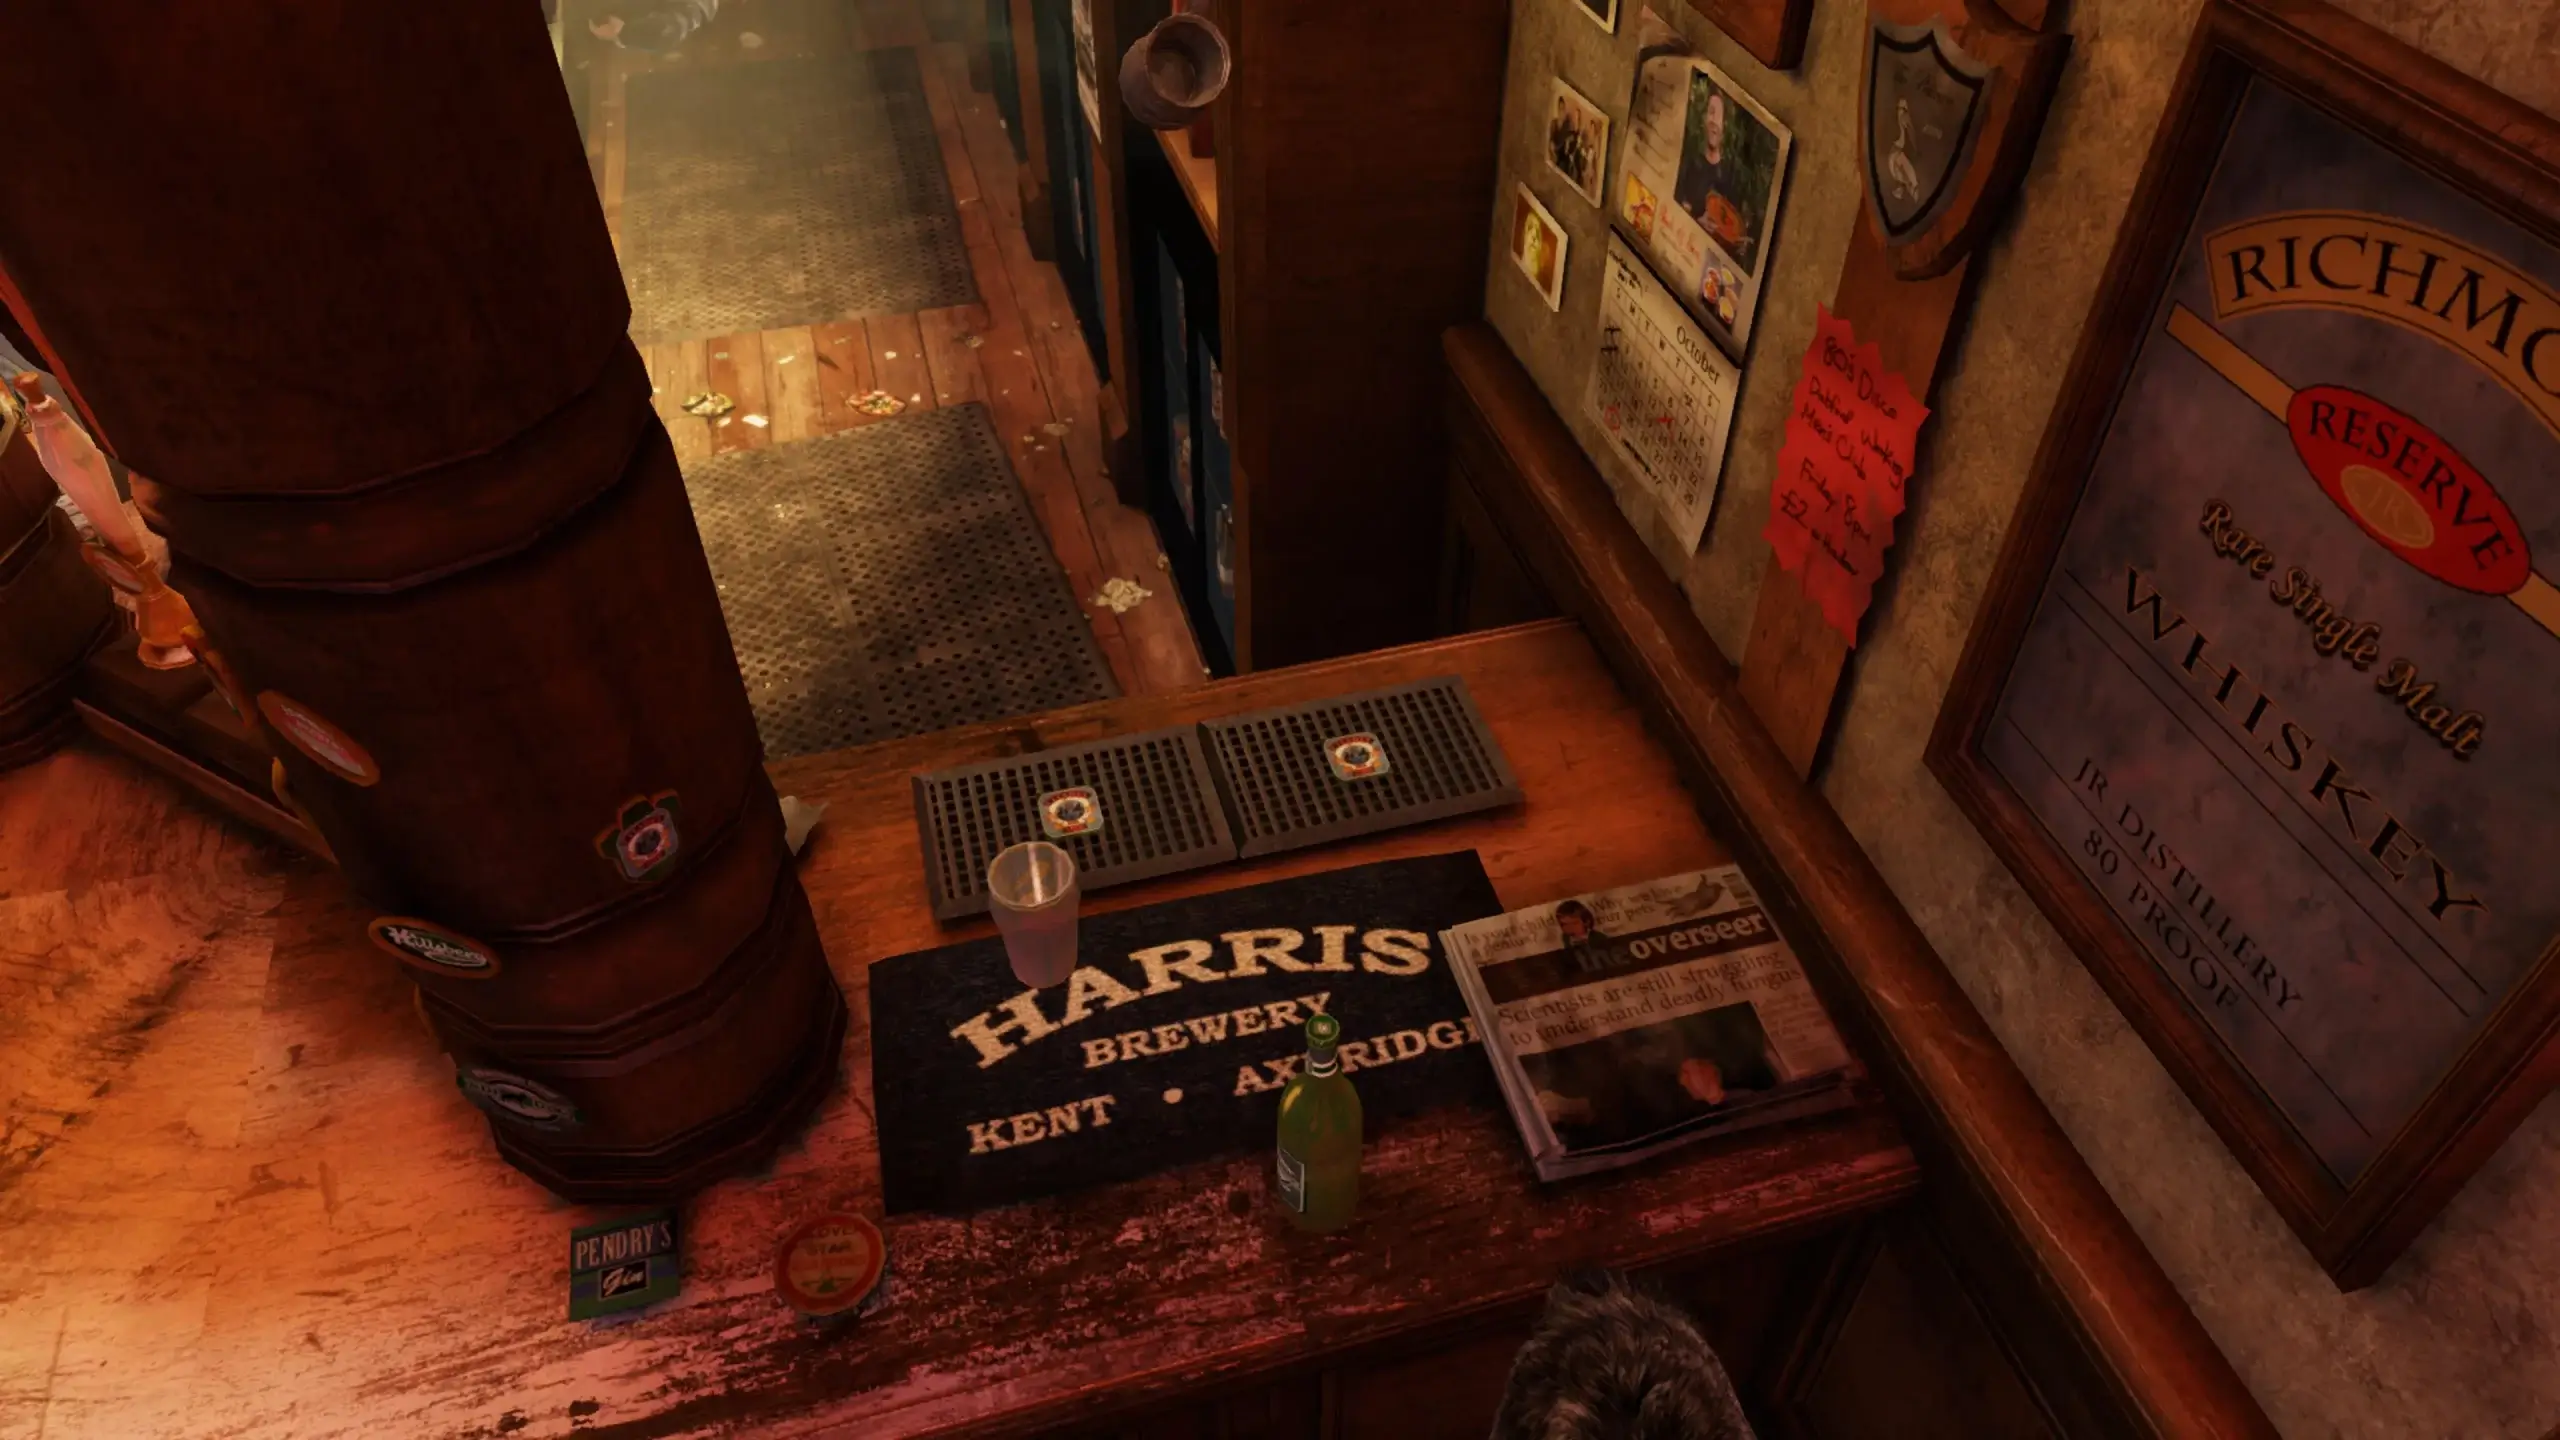 A newspaper on the end of a bar in the opening scene of Uncharted 3 with headline: "Scientists are still struggling to understand deadly fungus". An easter egg for The Last Of Us